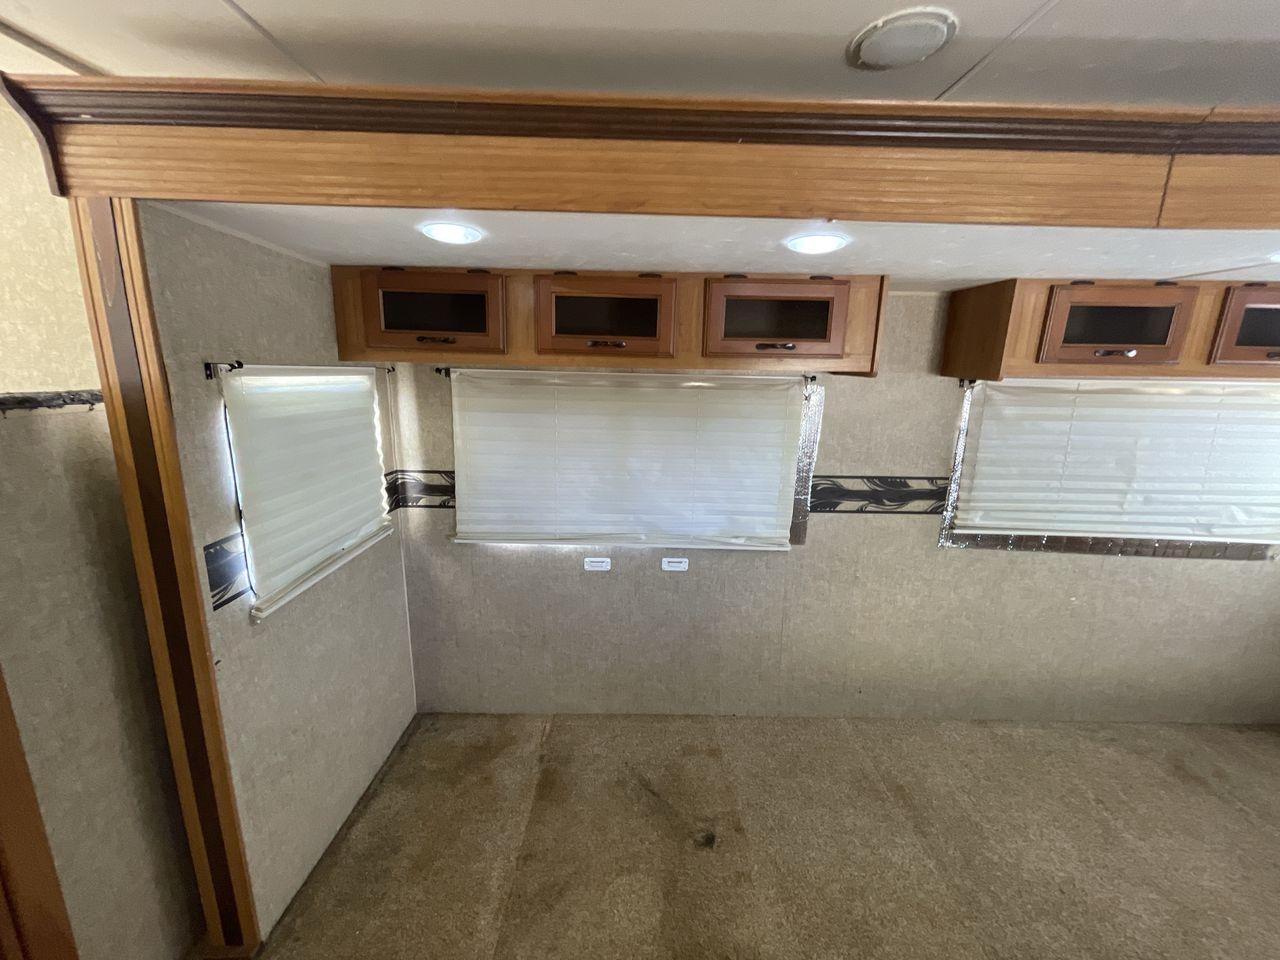 2014 BEIGE KZRV SPREE 282BHS (4EZTL2826E8) , Length: 31.33 ft. | Dry Weight: 5,610 lbs. | Gross Weight: 6,800 lbs. | Slides: 1 transmission, located at 4319 N Main St, Cleburne, TX, 76033, (817) 678-5133, 32.385960, -97.391212 - Photo #14